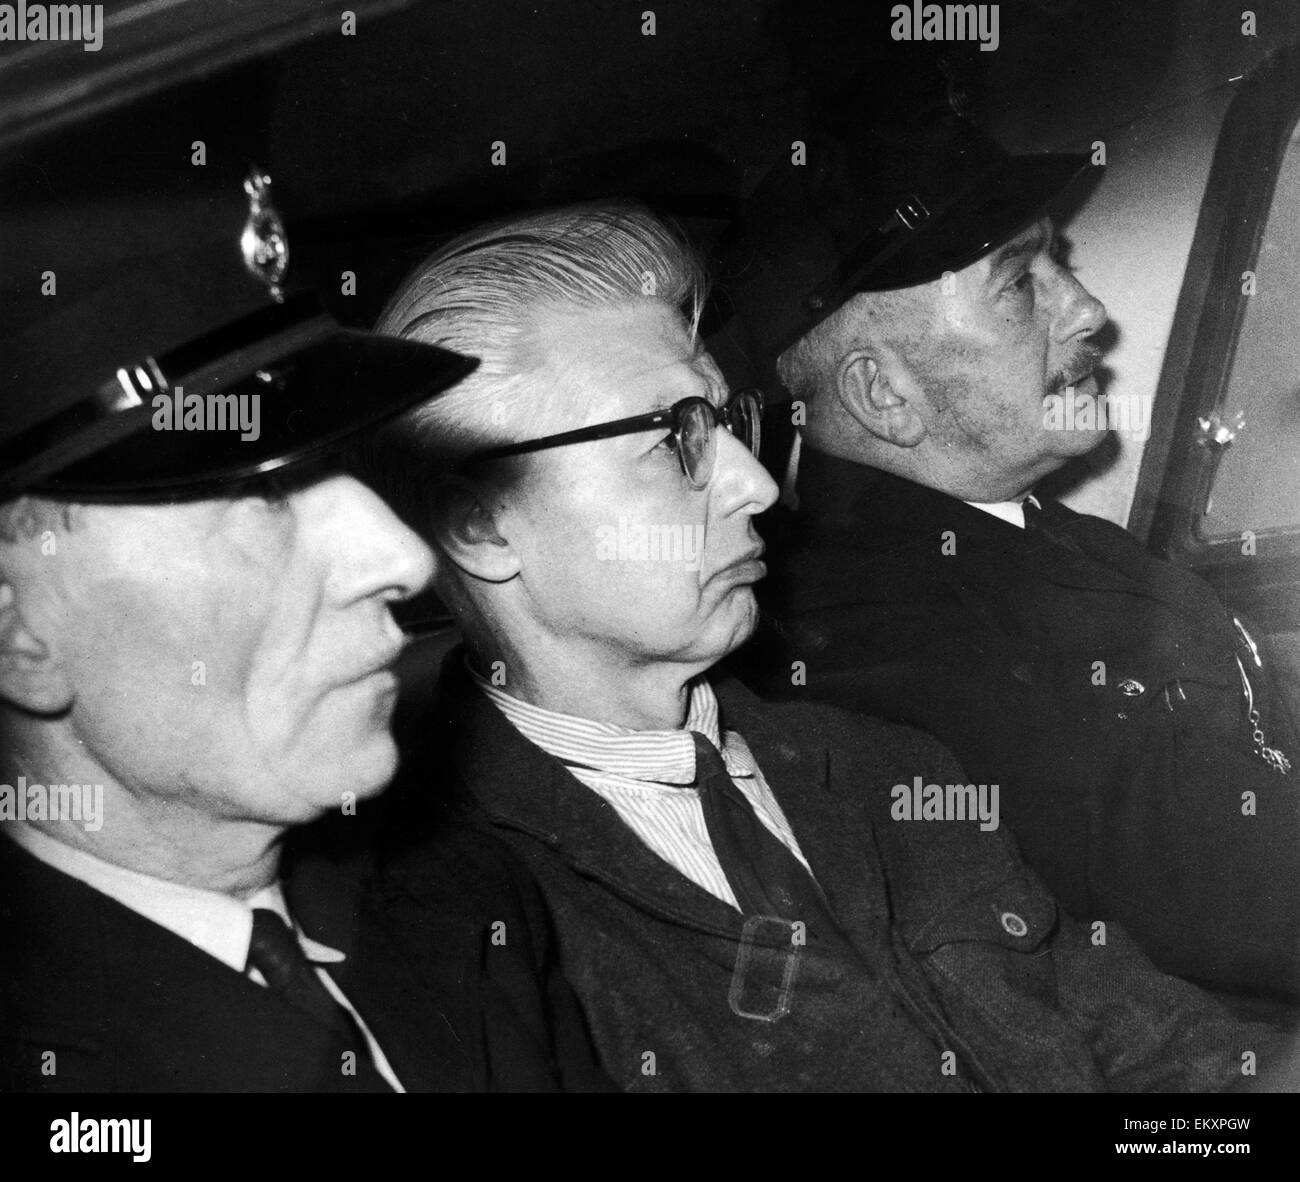 Russian spy Peter Kroger being transferred from Wakefield prison to Parkhurst following a security scare after George Blake escaped from Wormwood Scrubs. 26th October 1966. Stock Photo